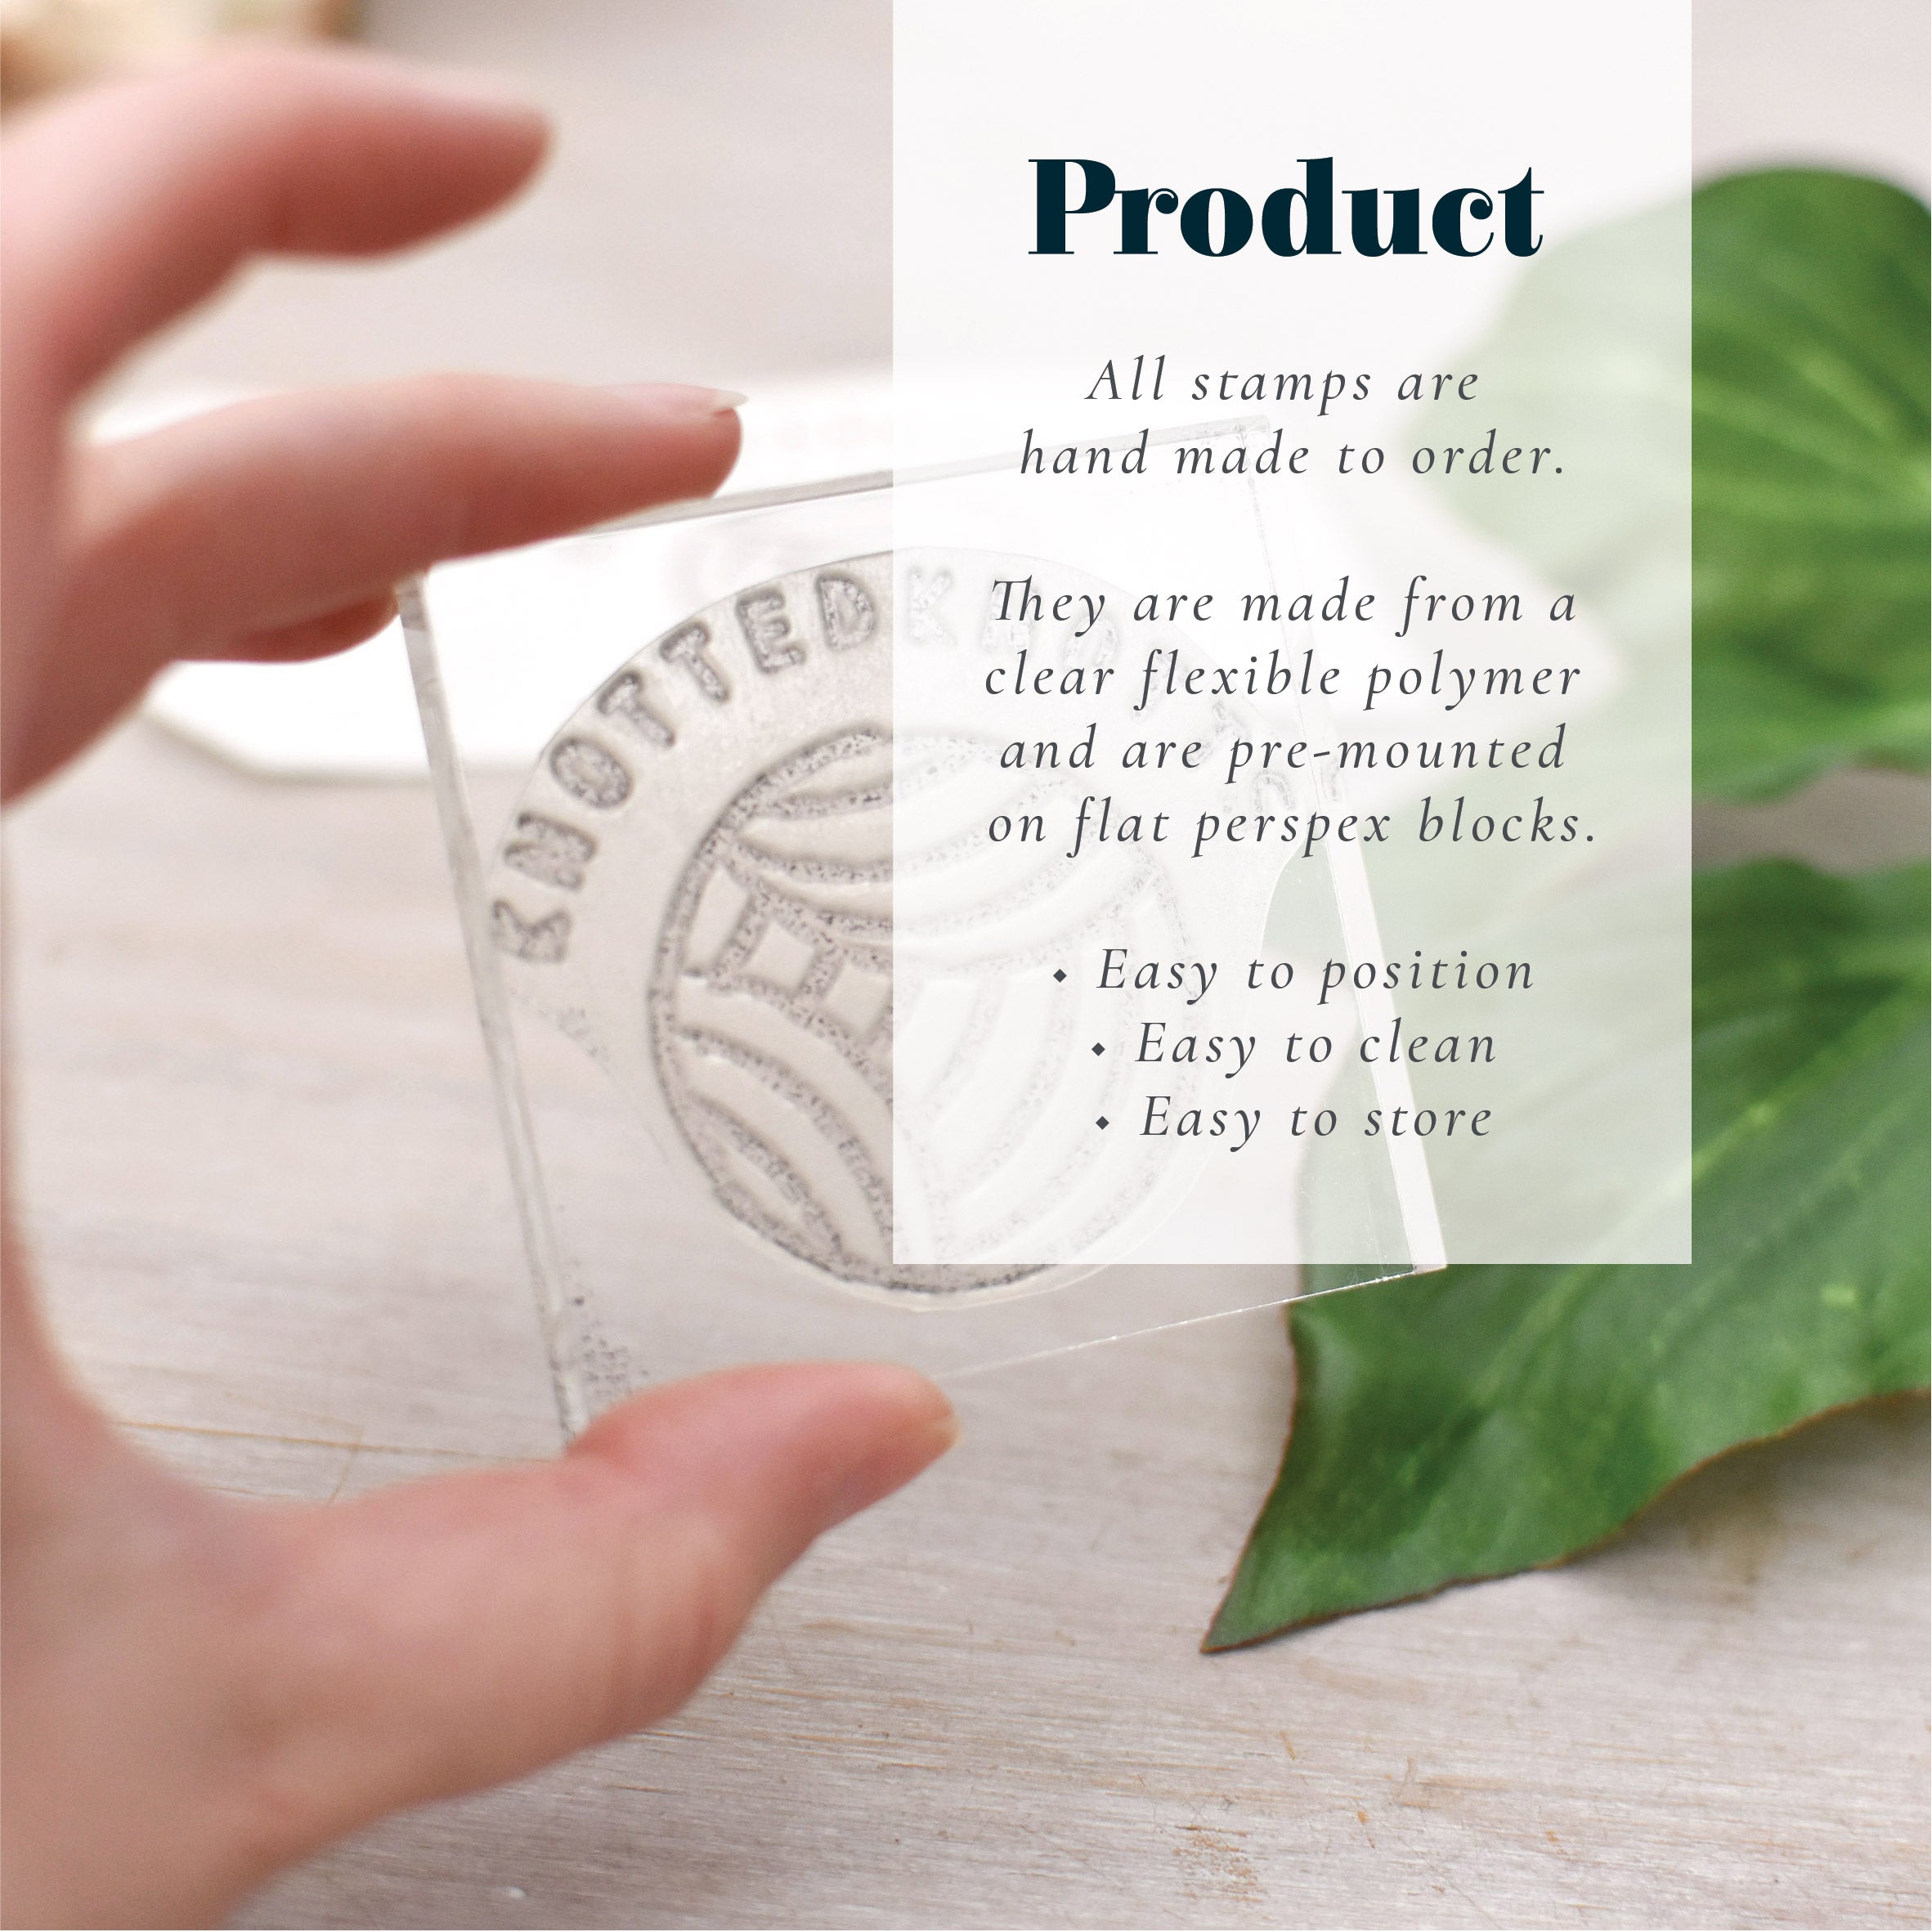 Sustainable Packaging Rubber Stamp